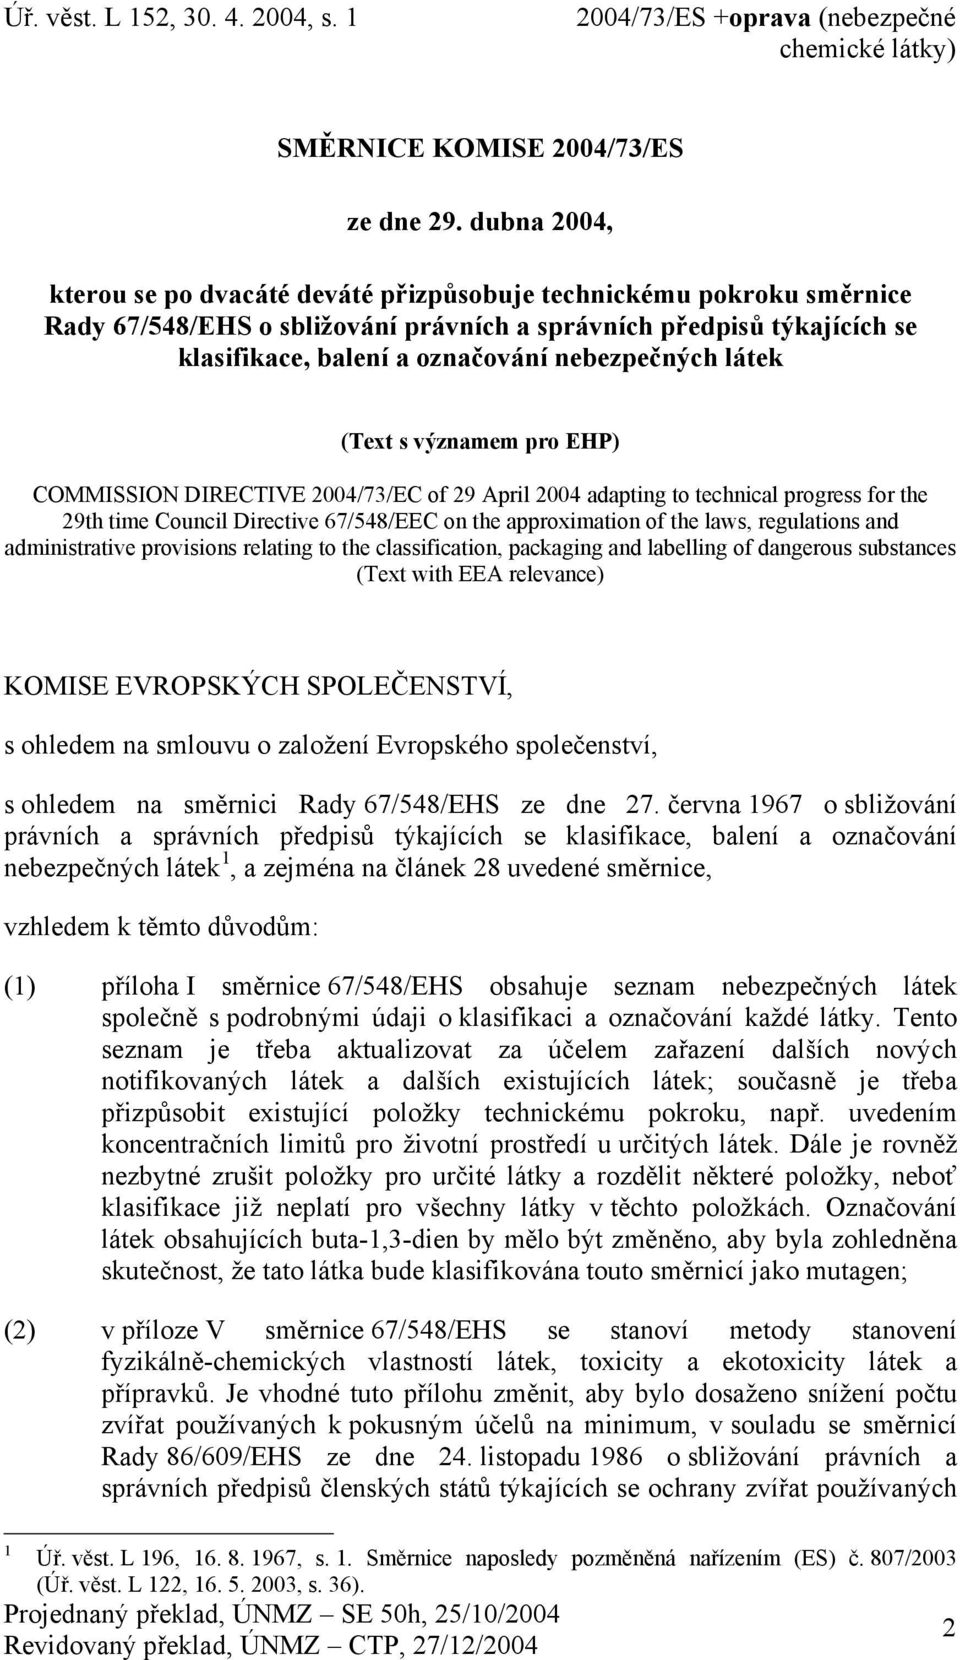 nebezpečných látek (ext s významem pro EHP) COMMISSION DIRECIVE 2004/73/EC of 29 April 2004 adapting to technical progress for the 29th time Council Directive 67/548/EEC on the approximation of the